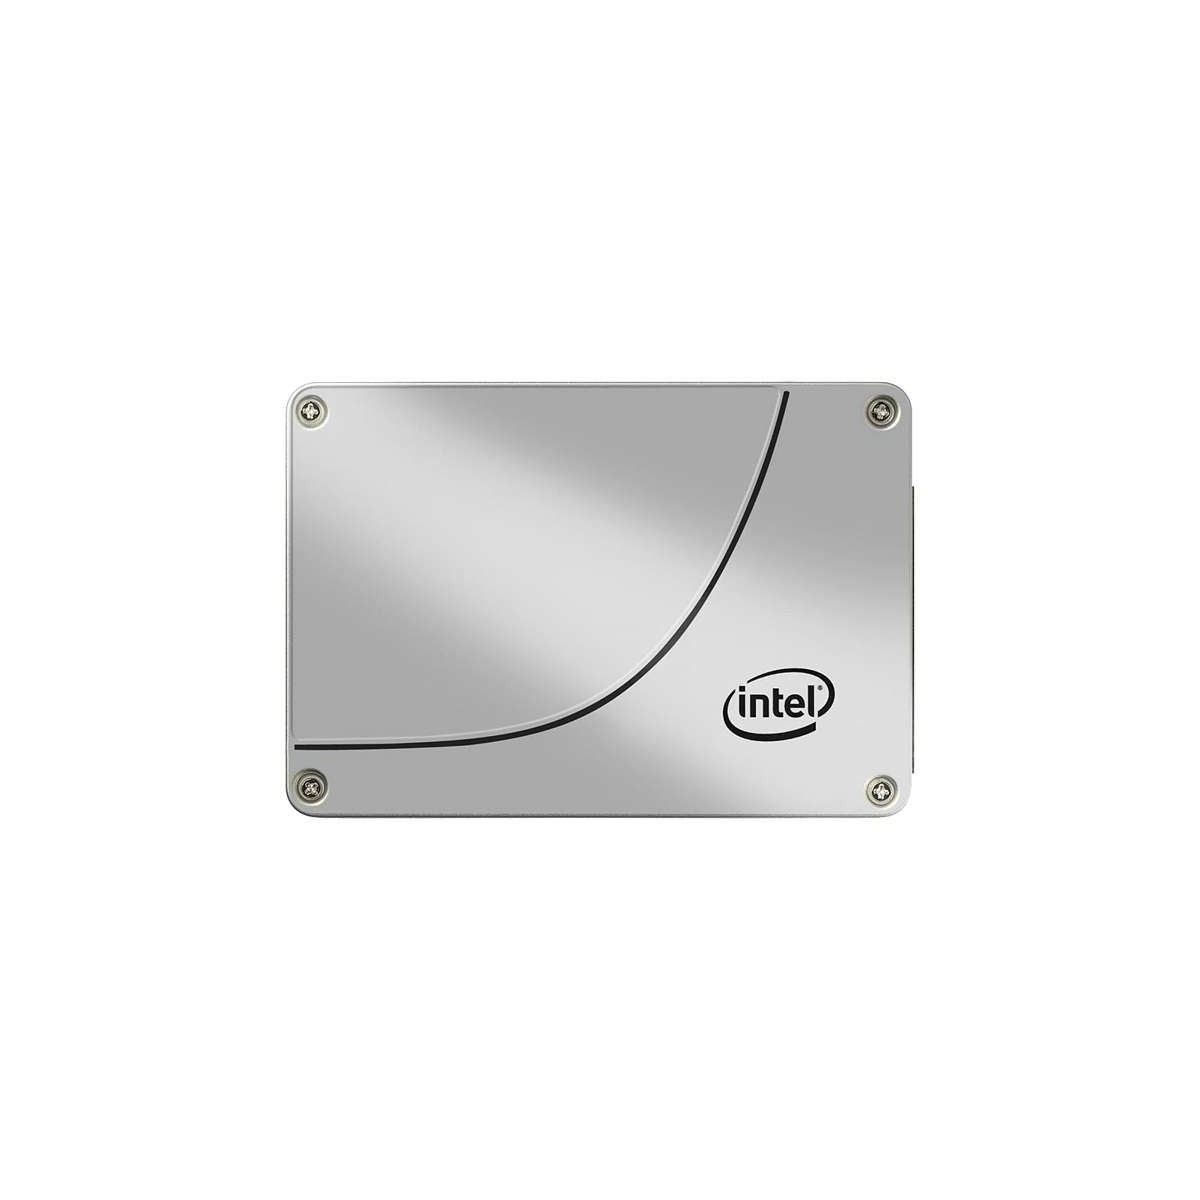 Intel Solid-State Drive DC S3610 Series 2.5 SATA 480 GB - Solid State Disk - Internal